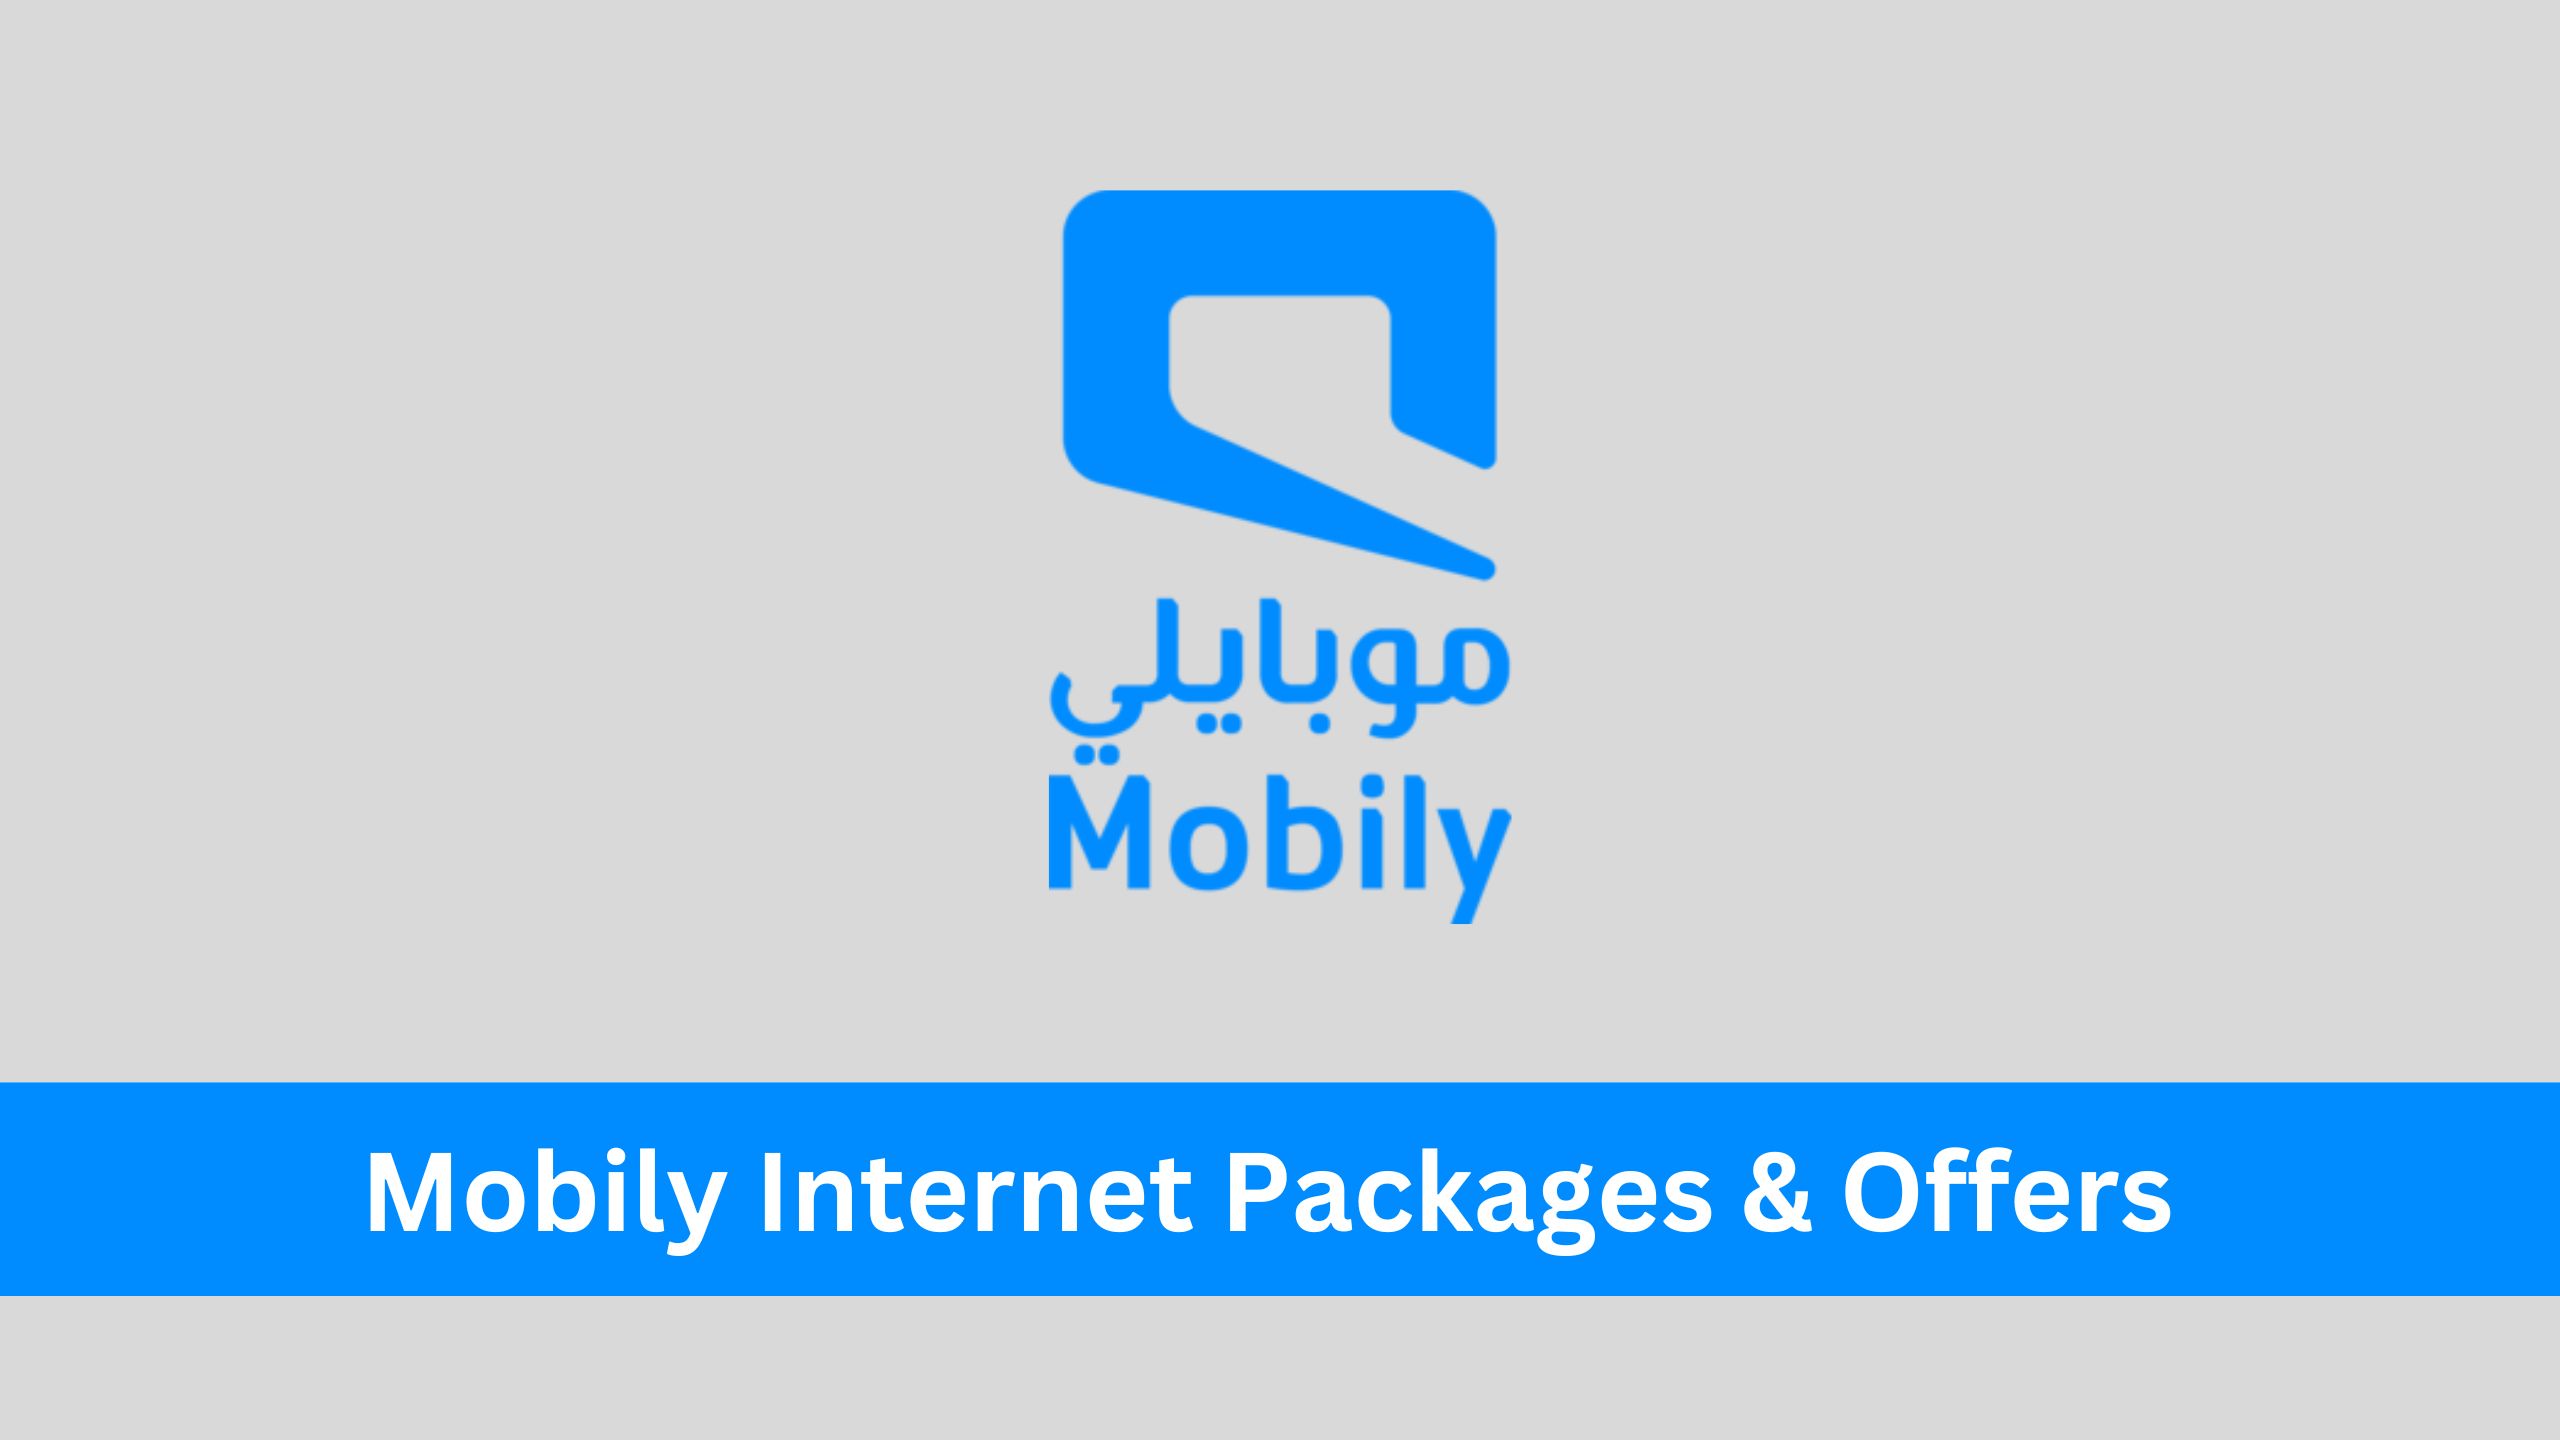 Mobily Internet Packages & Offers with Codes : Prepaid, Postpaid, Unlimited